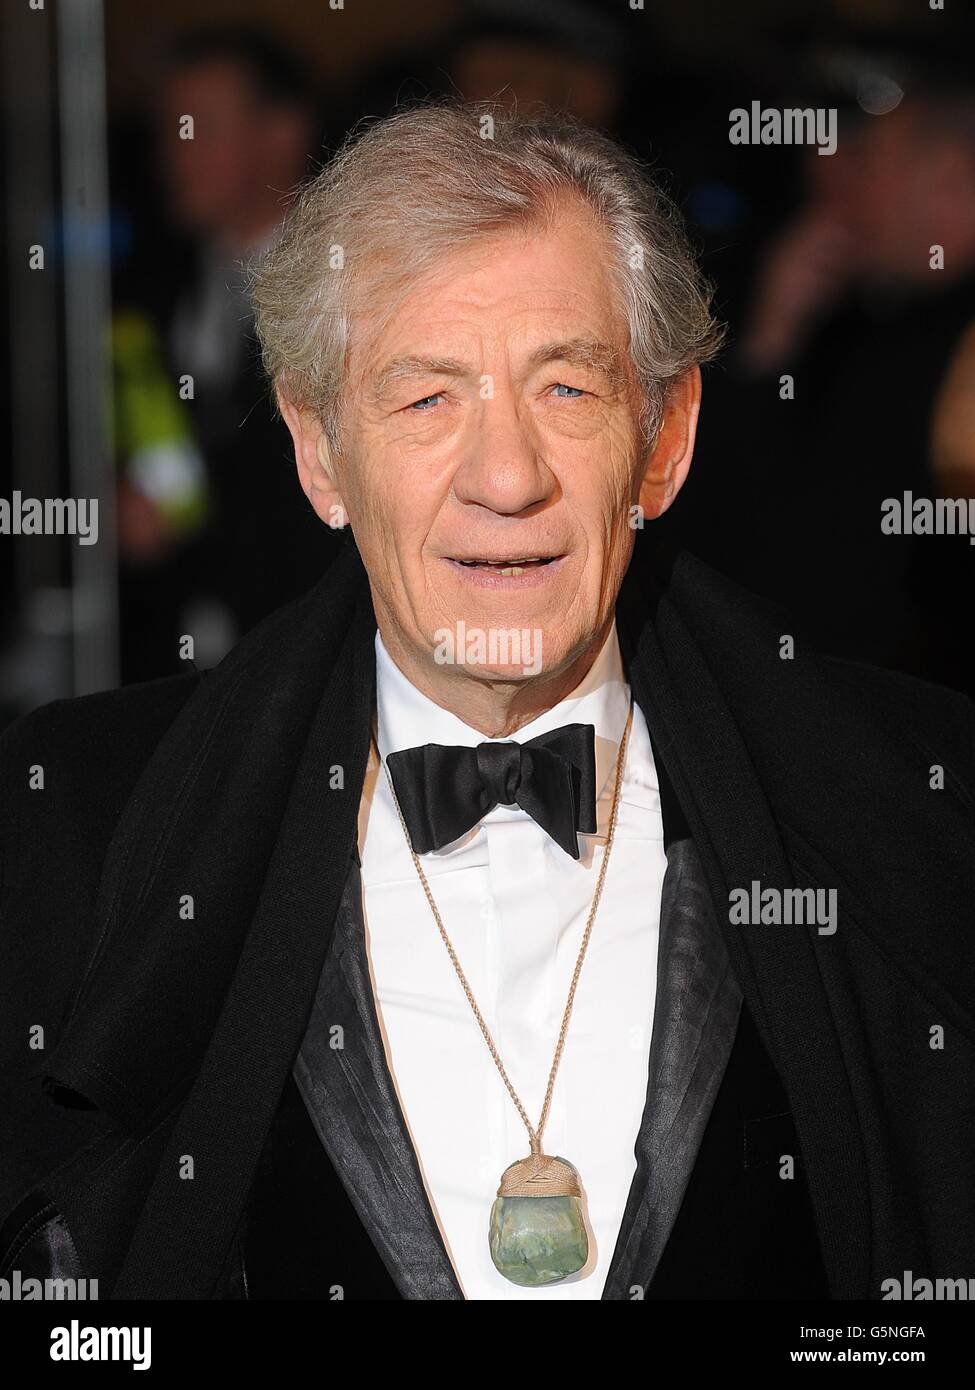 Sir Ian McKellen arriving for the UK Premiere of The Hobbit: An Unexpected Journey at the Odeon Leicester Square, London. Stock Photo